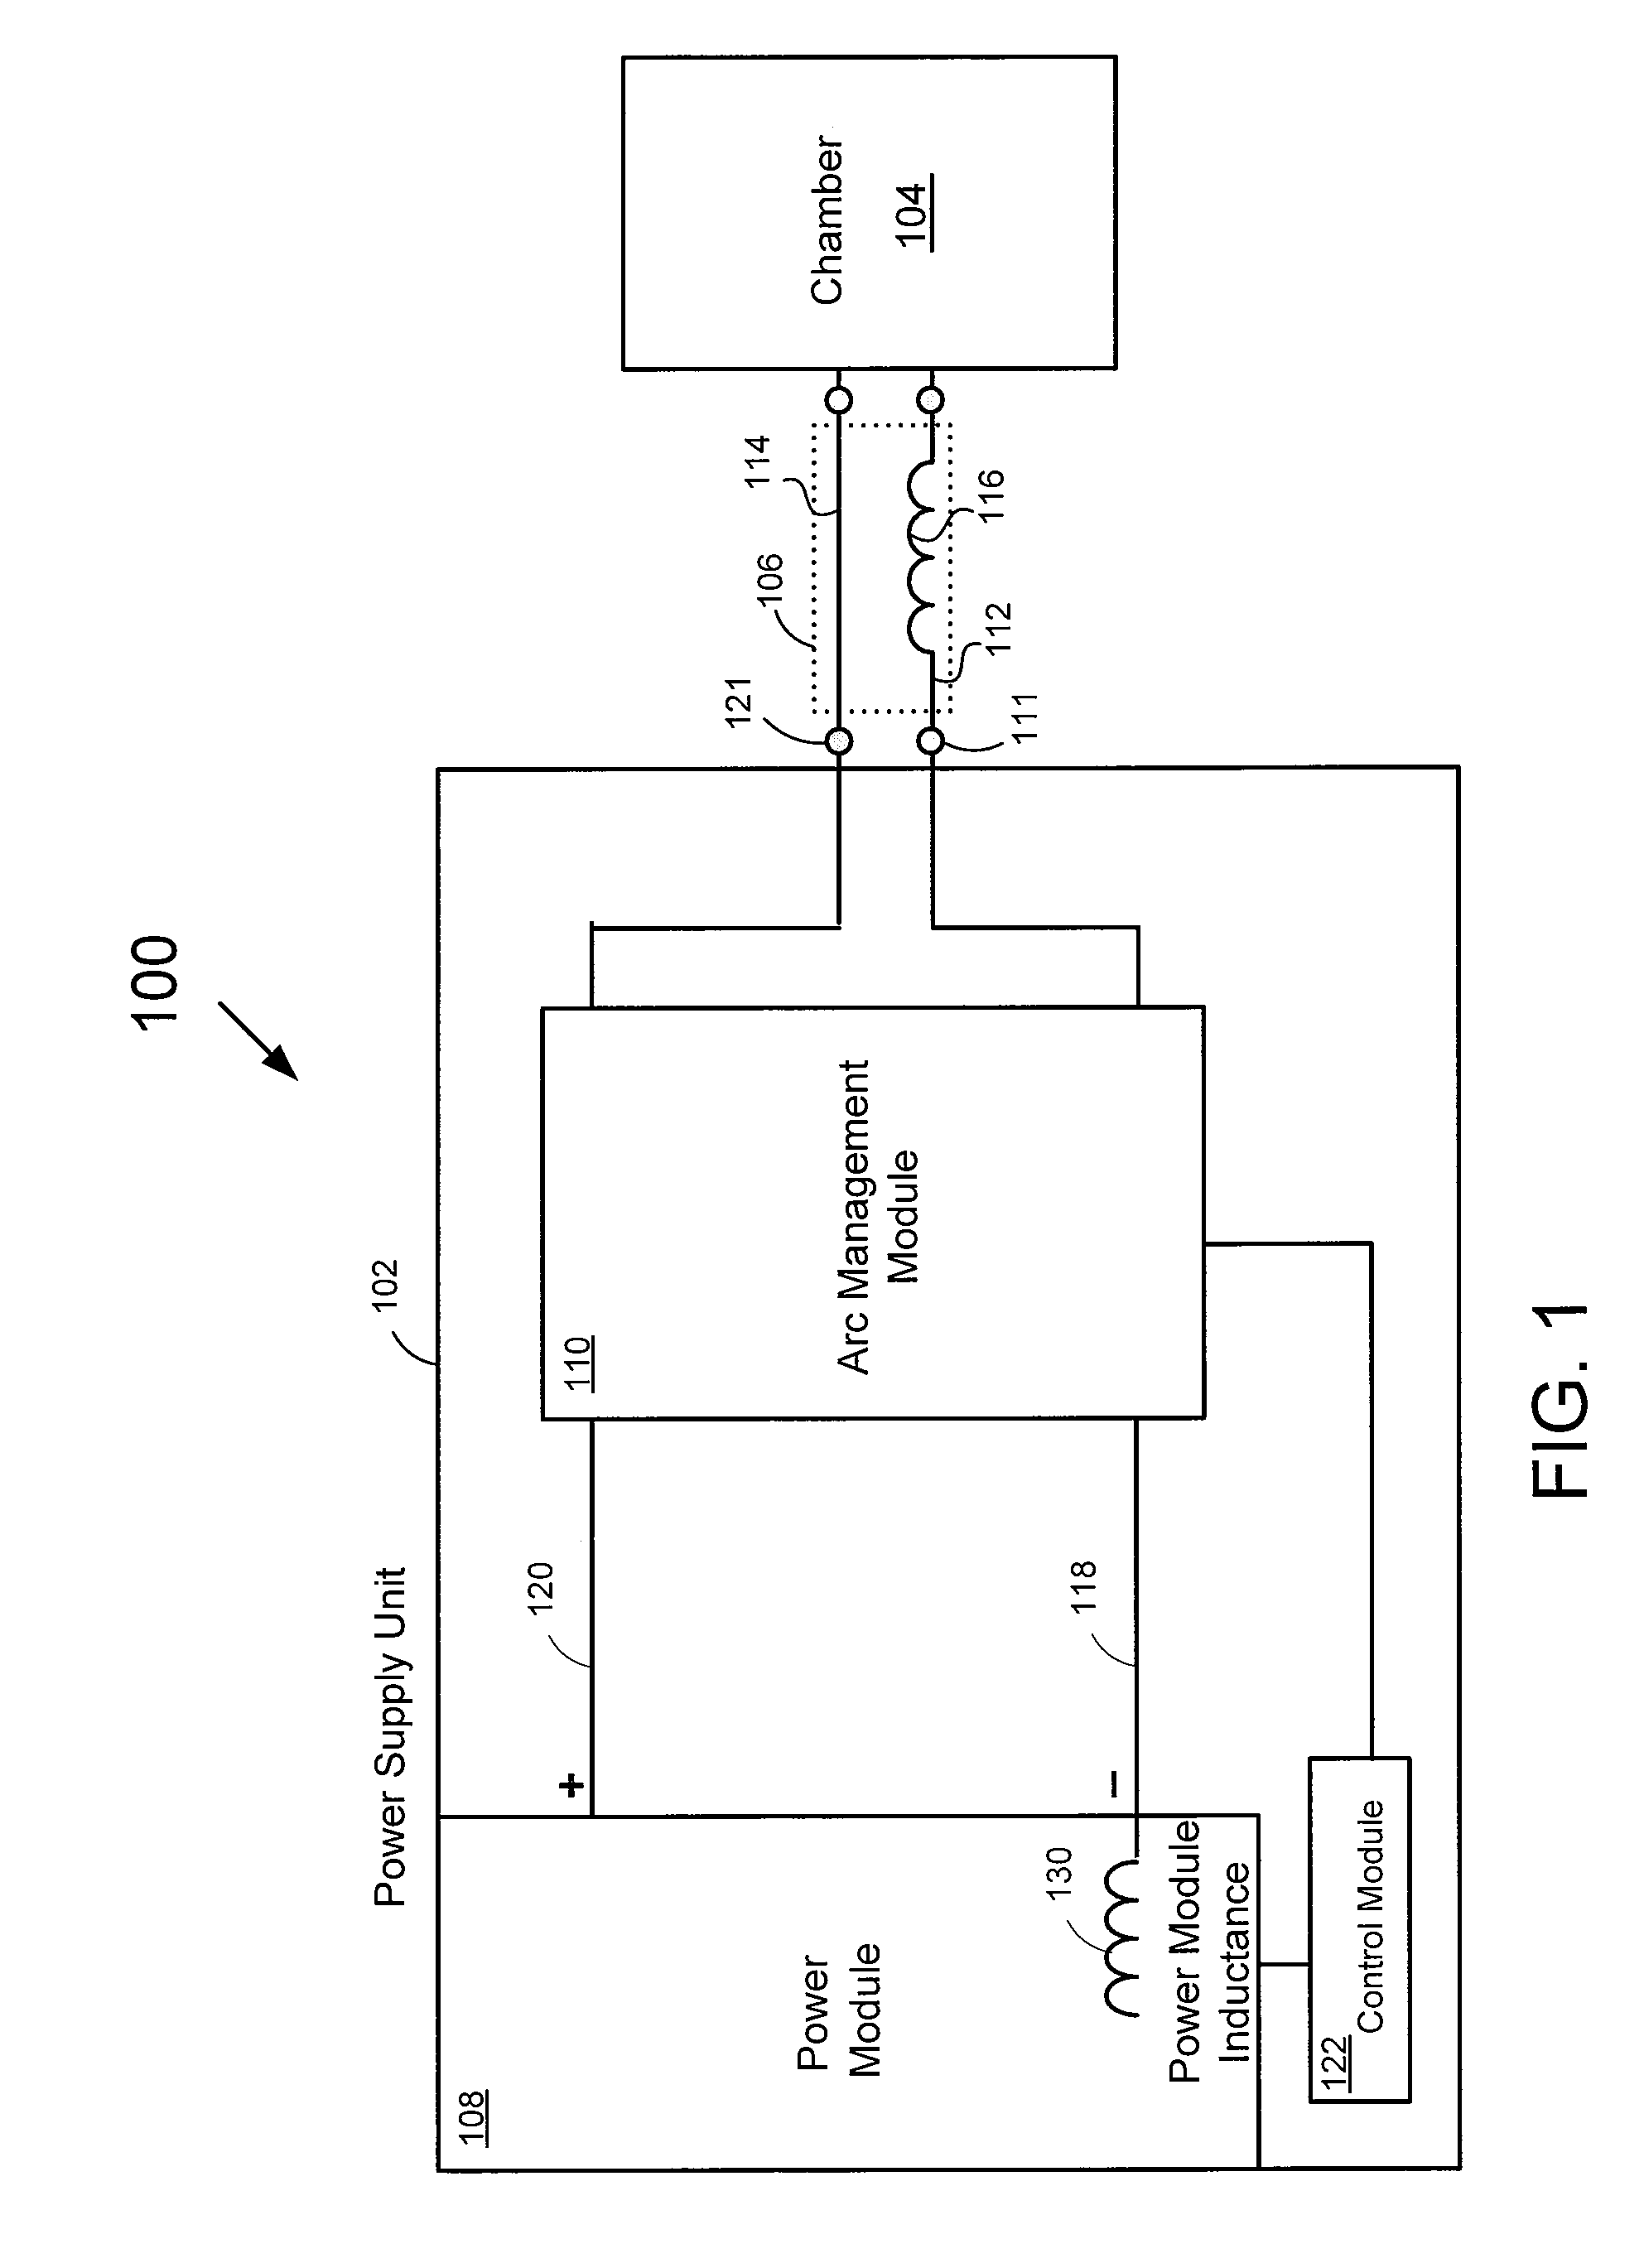 System and method for managing power supplied to a plasma chamber